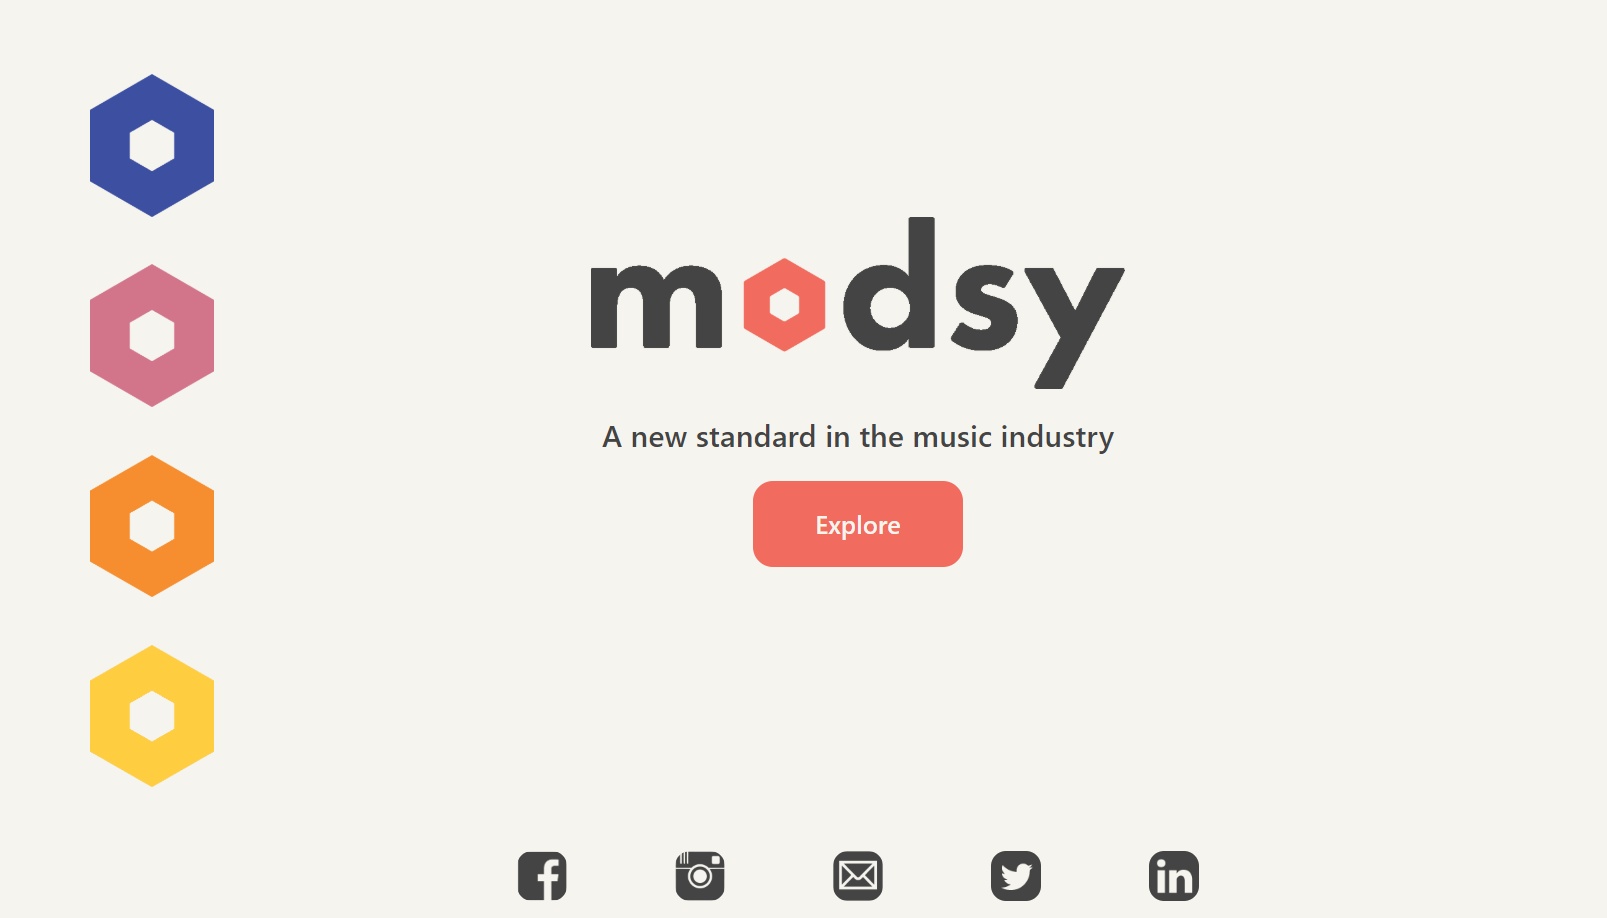 This module I have also been quite busy with making a website for Modsy. This picture shows the design. To see the complete website, see the link below!